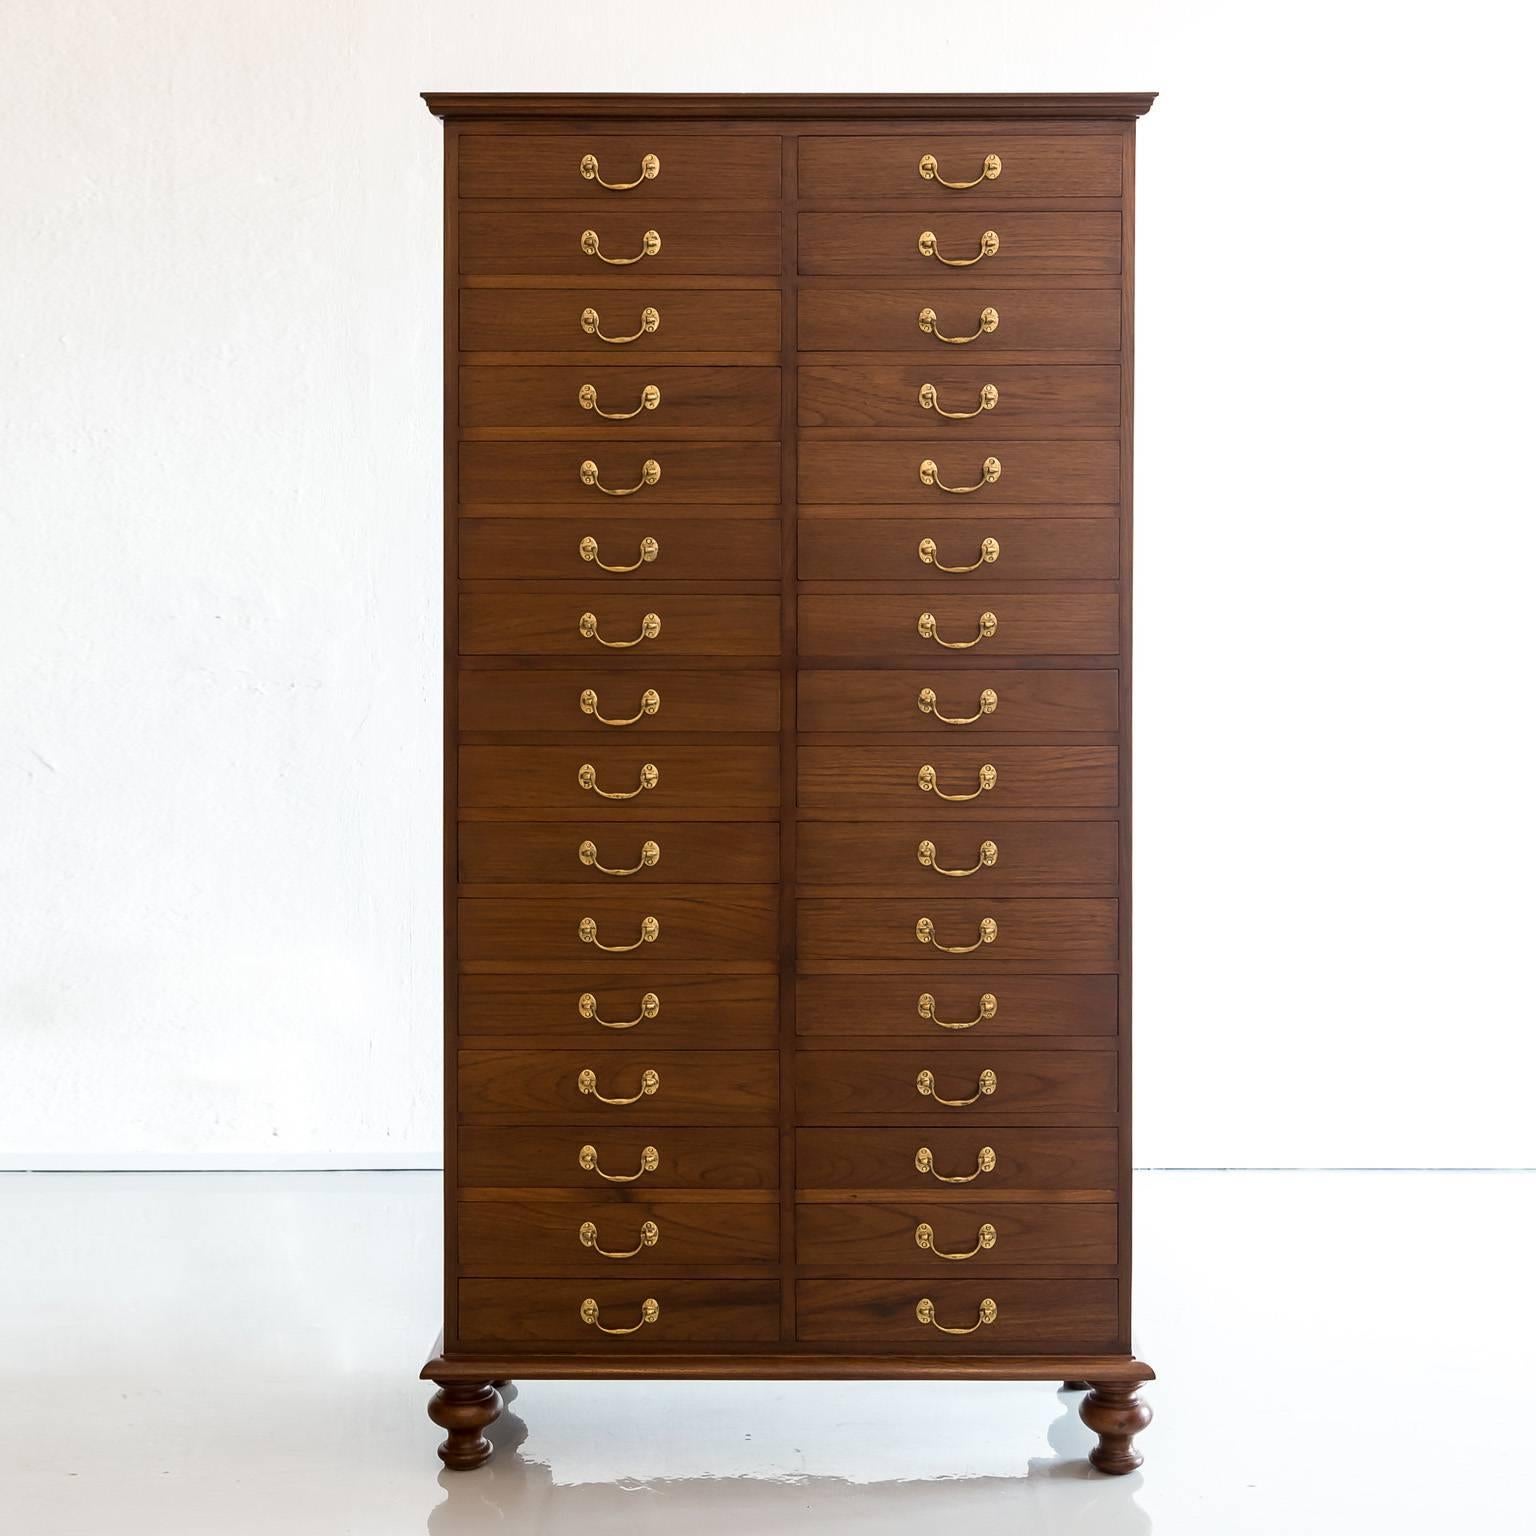 A British Colonial multi-drawer cabinet made of Burma teak wood. It features an overhanging moulded top above two rows of 16 drawers of equal size, all drawers with swan neck brass handles. The cabinet rests on a base that stands on four legs. Due